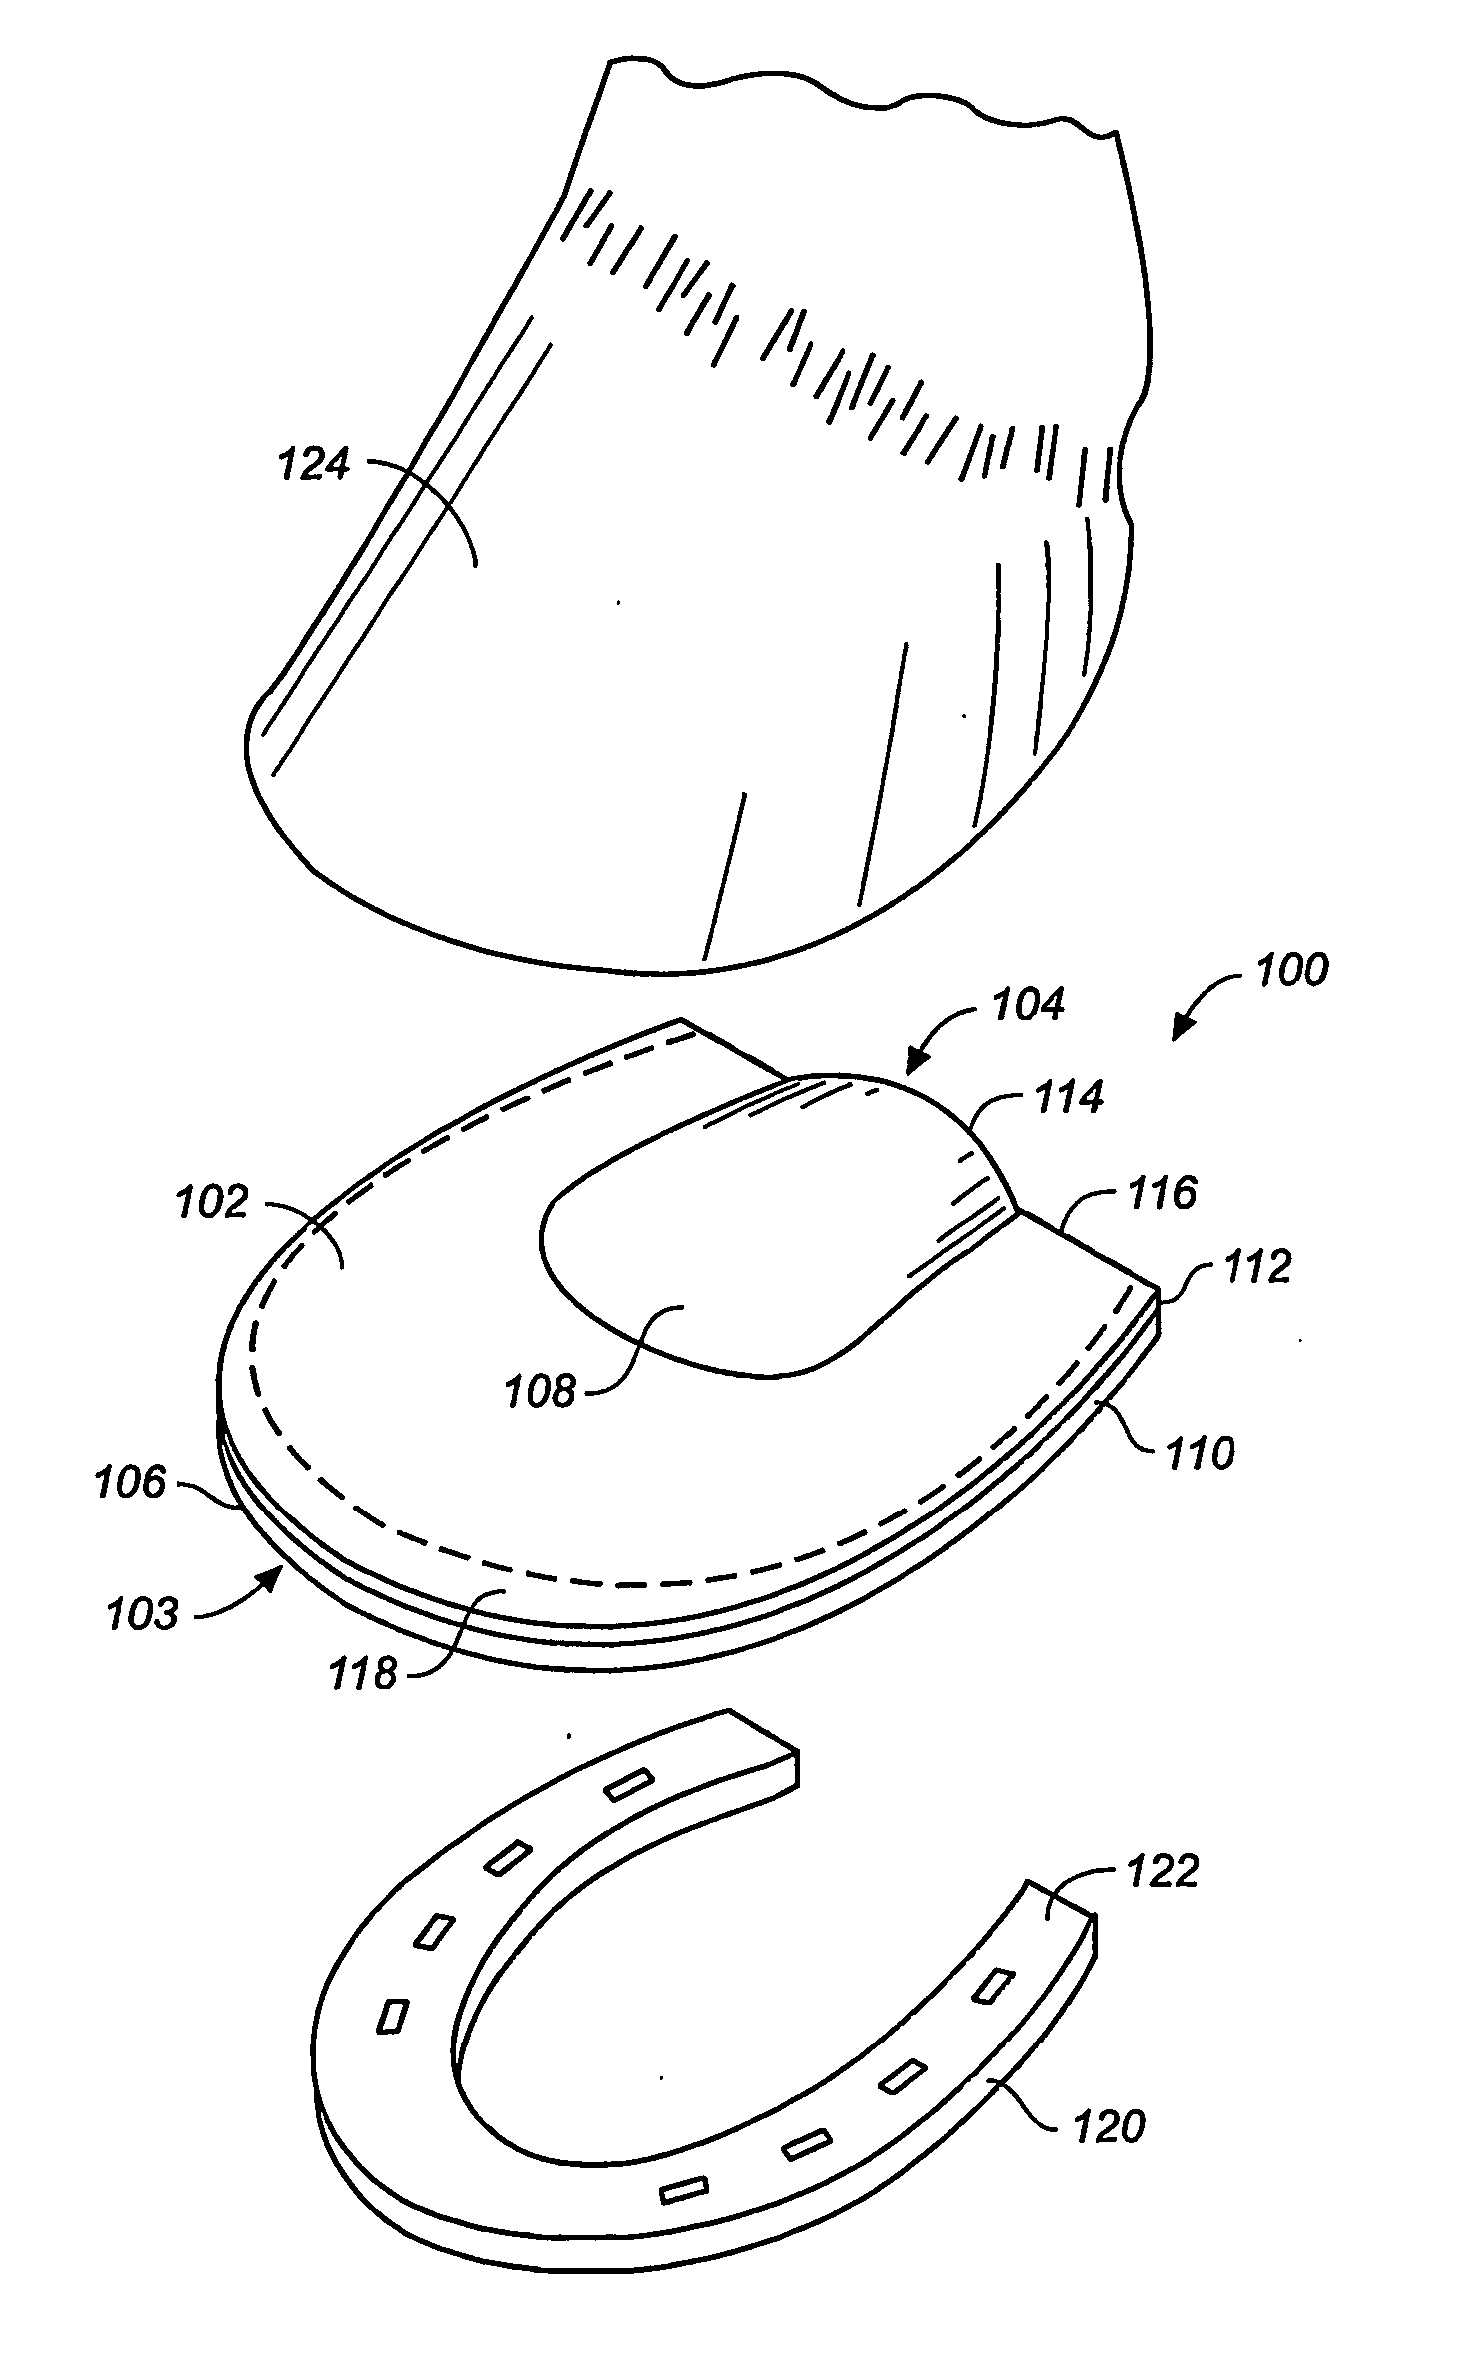 Inflatable horseshoe support pad